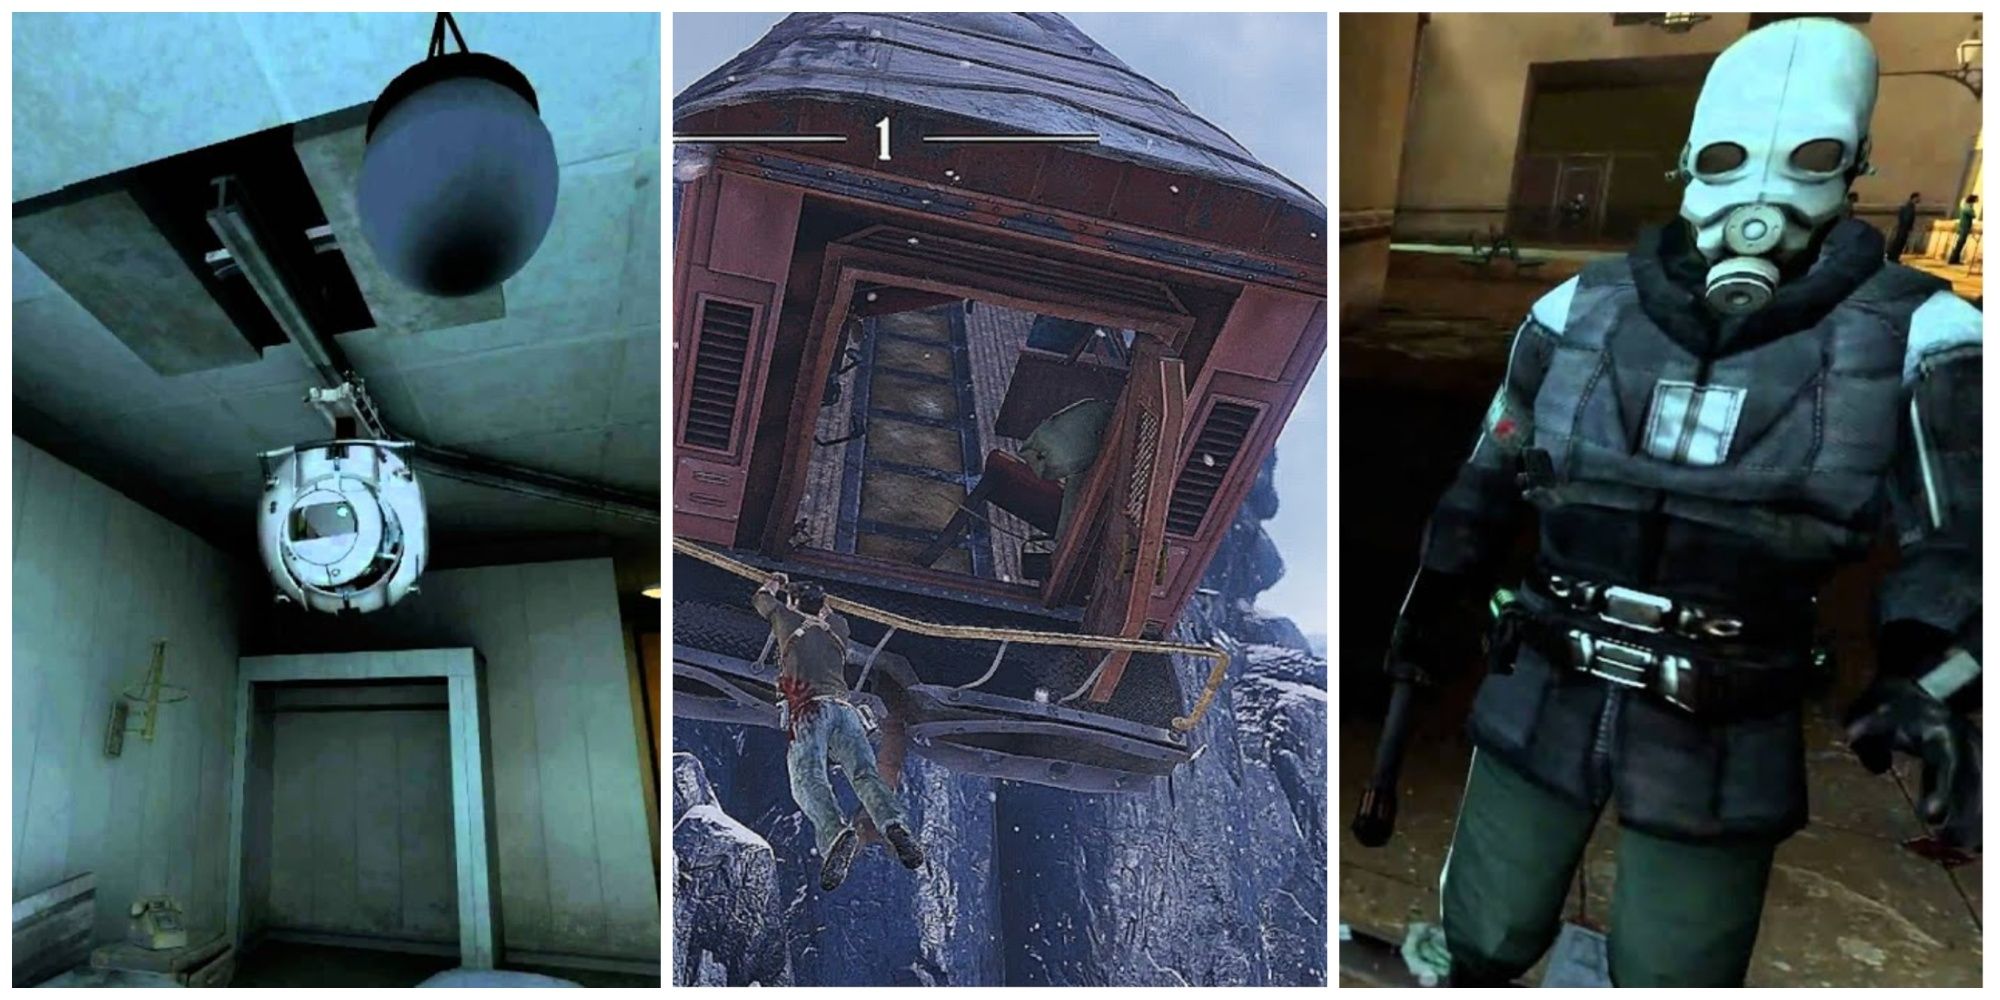 Tri-split of Wheatley from Portal 2, Nathan Drake hanging from a train in Uncharted 2, and a guard from Half-Life 2